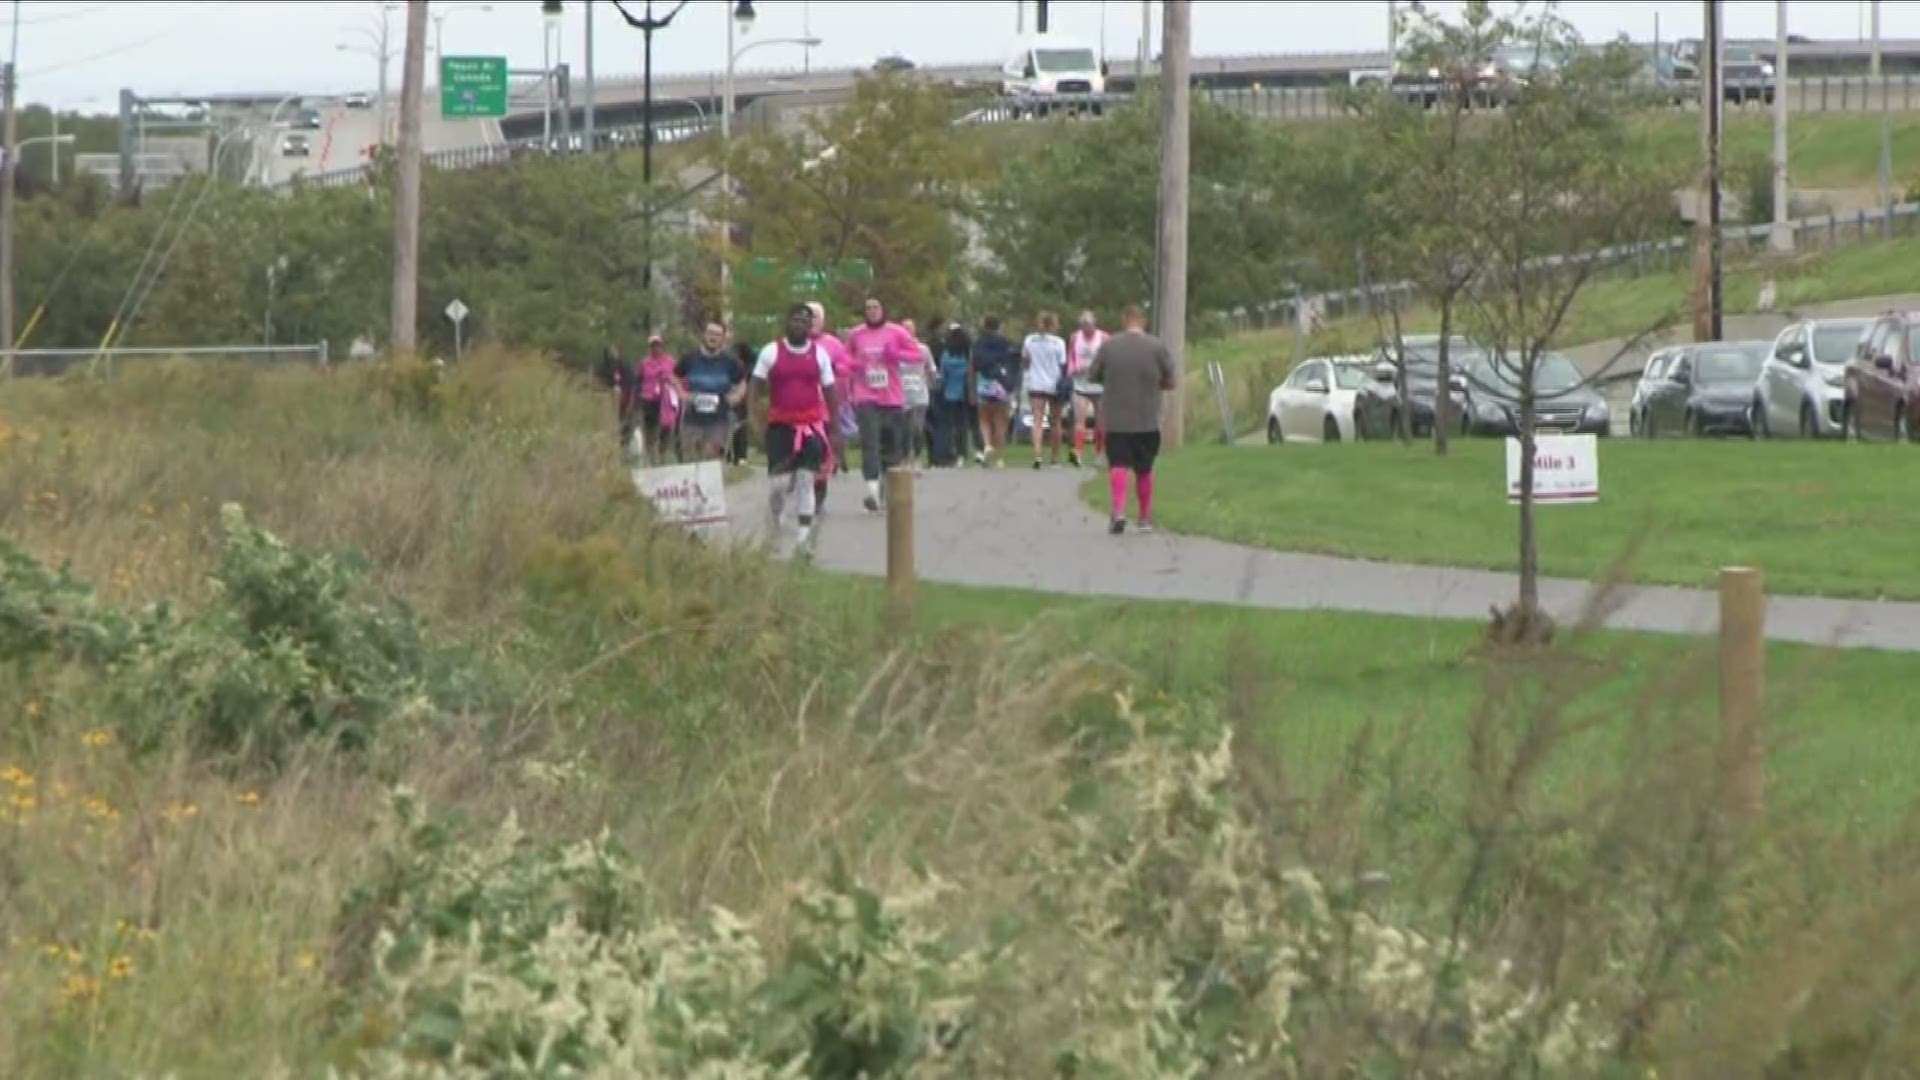 More than 10 thousand people put on their pink and made their way to the American Cancer Society's Making Strides Against Breast Cancer 5K walk and run.